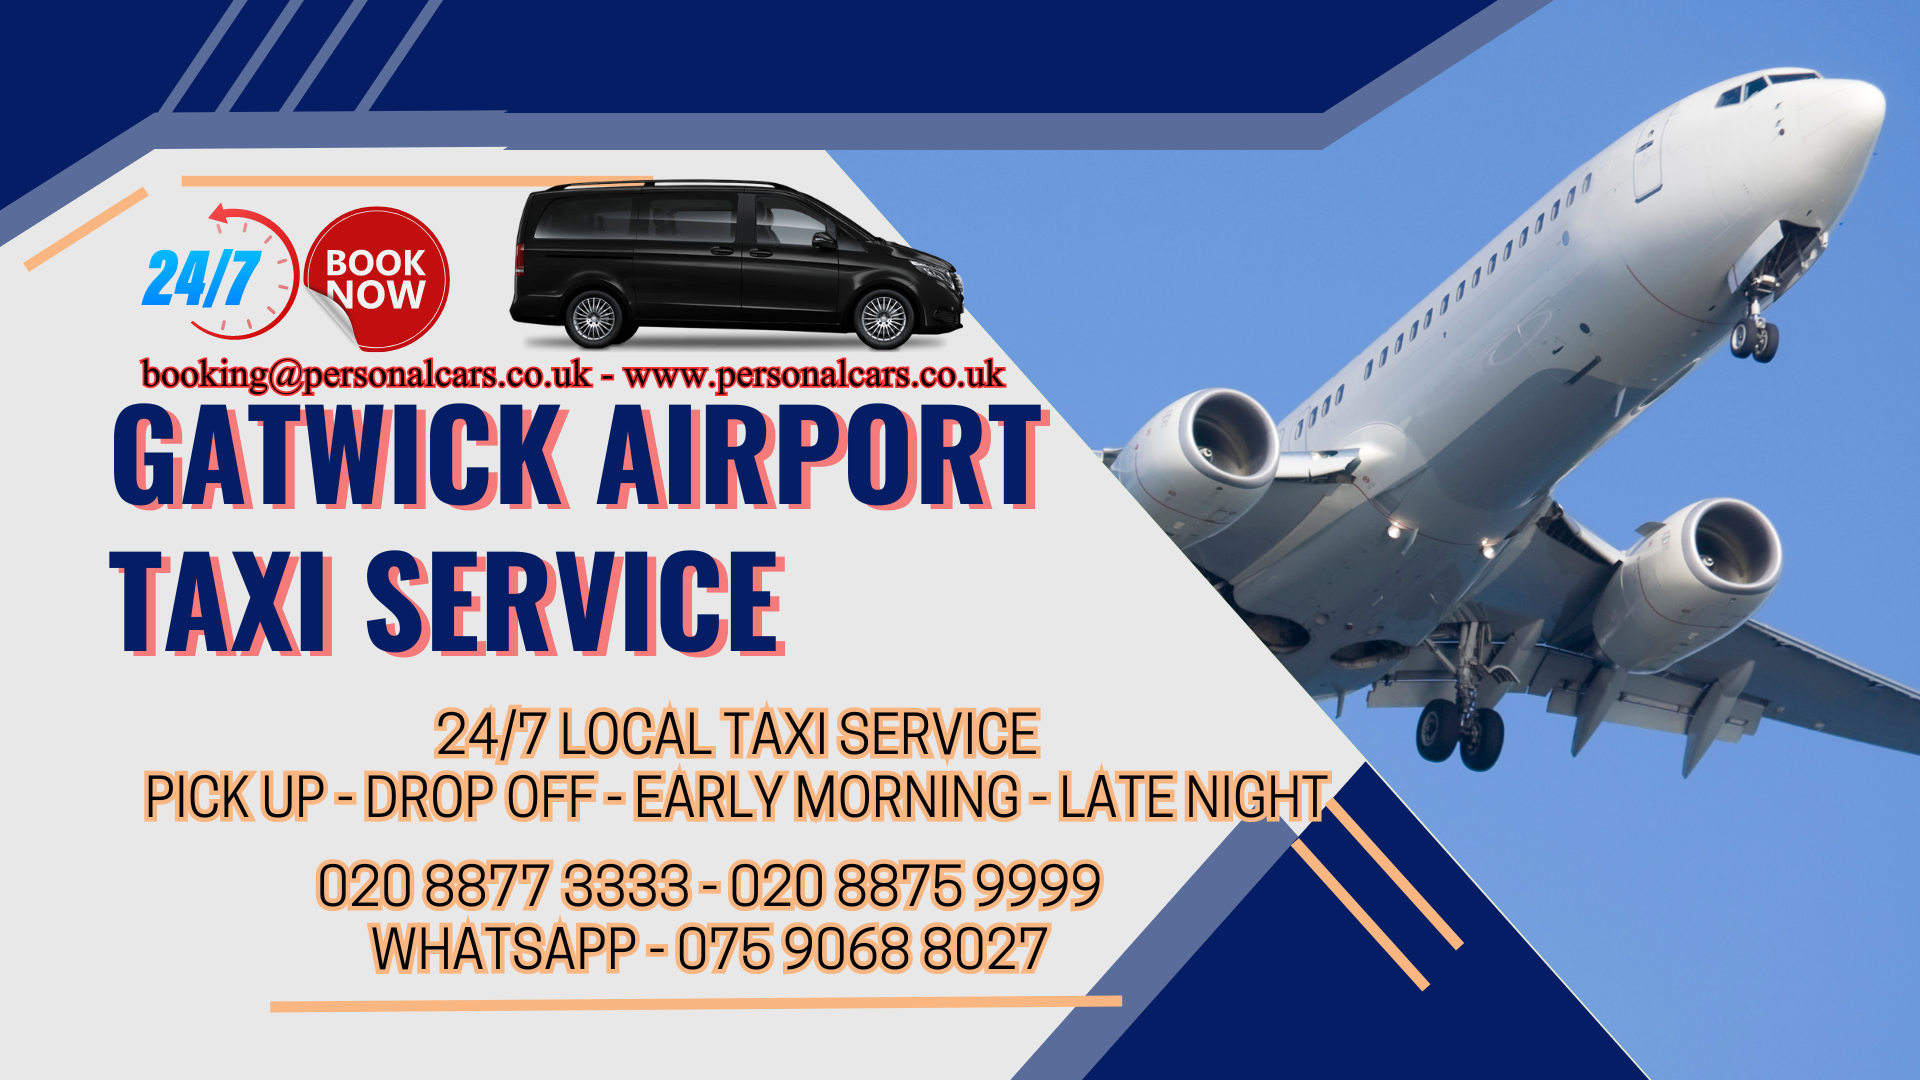 Gatwick airport taxi service call to book